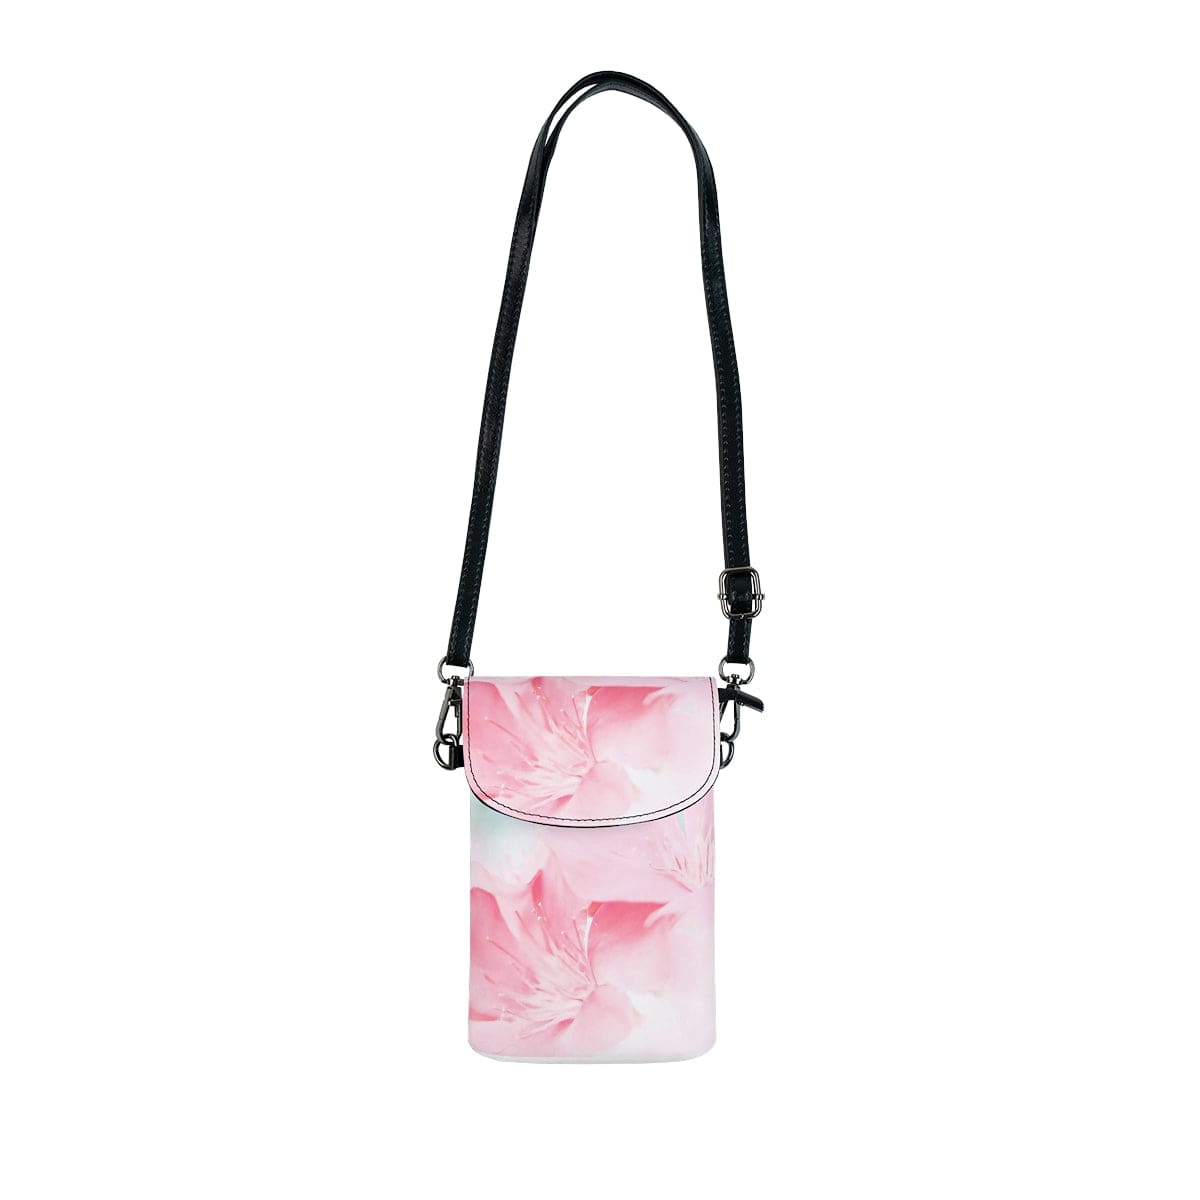 Crossbody Cell Phone Purse Pink Flower Bloom Peaceful Spring Nature - Bags